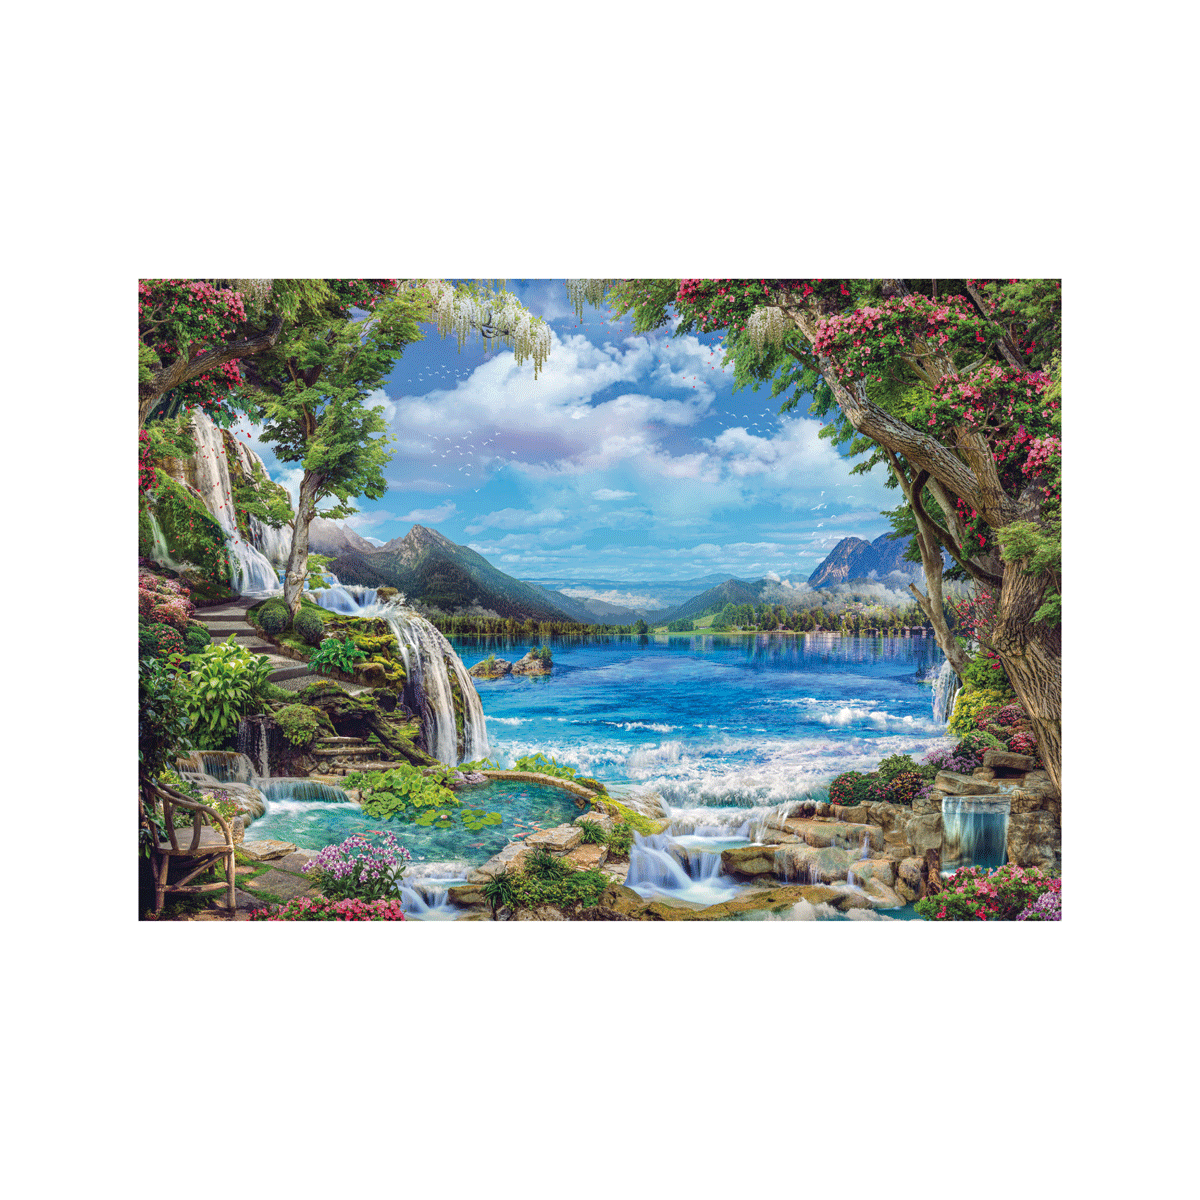 Clementoni puzzle high quality collection - paradise on earth - 2000 pezzi, puzzle adulti - CLEMENTONI